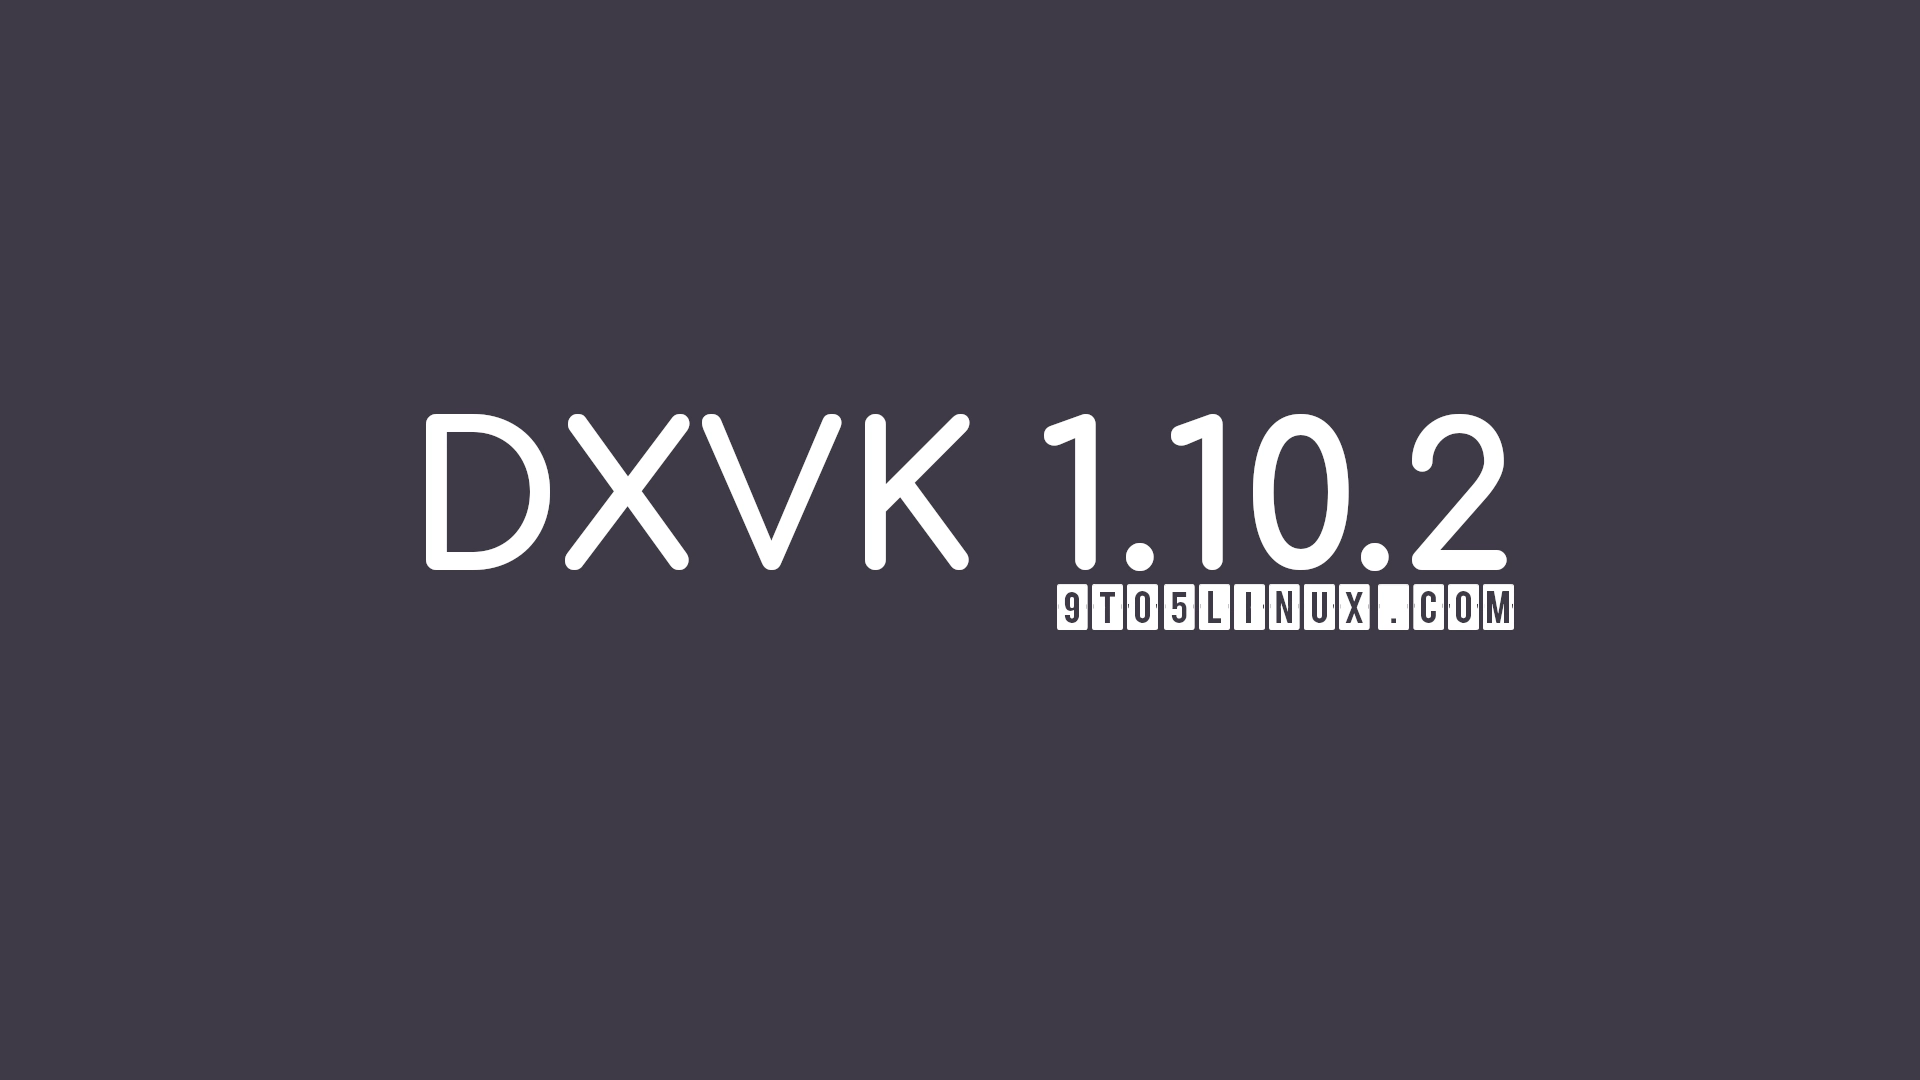 DXVK 1.10.2 Brings Fixes for Dead Space, Myst V, Godfather, and Many Other Games